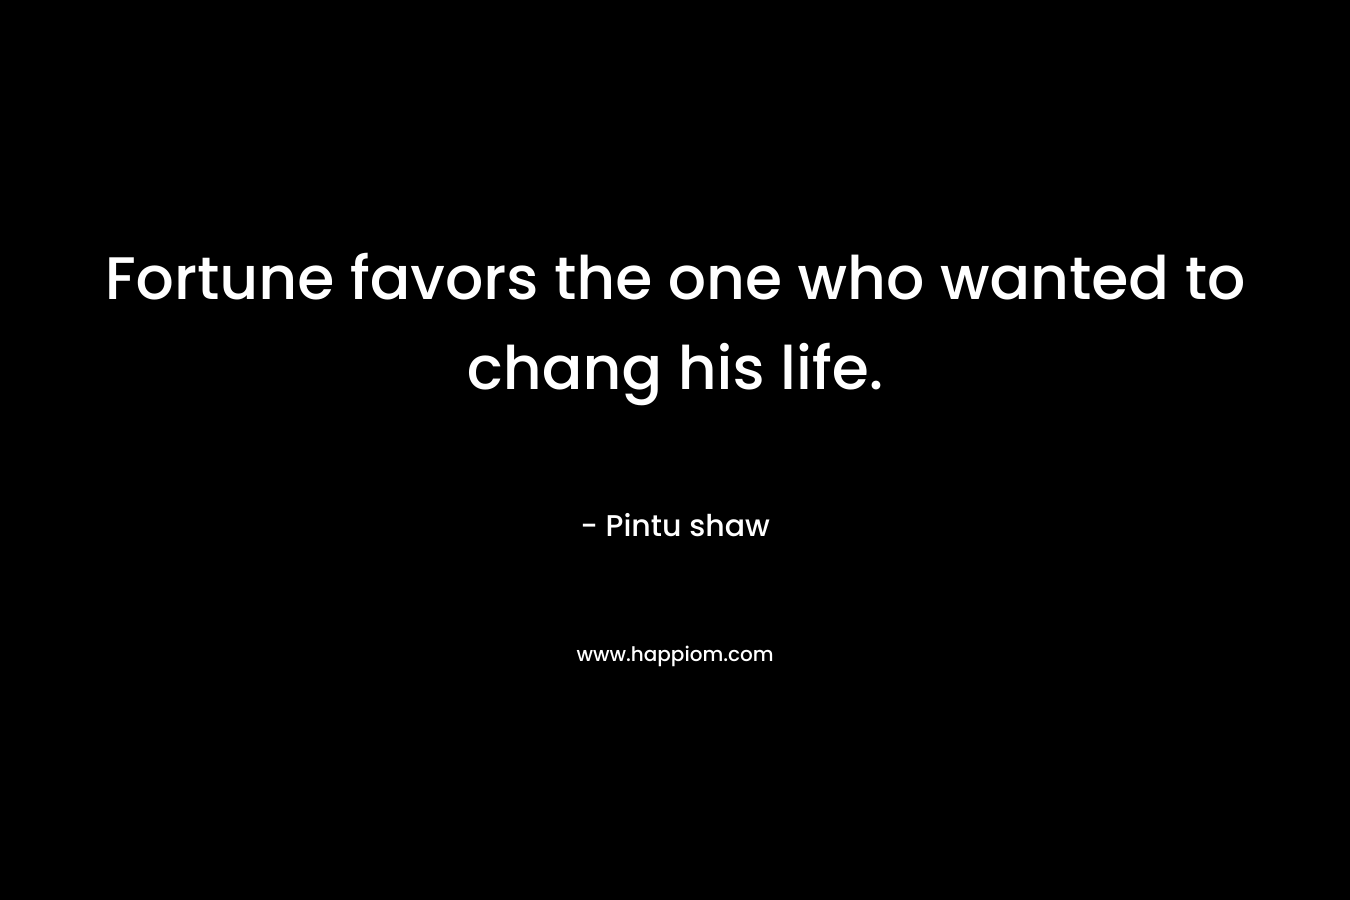 Fortune favors the one who wanted to chang his life. – Pintu shaw